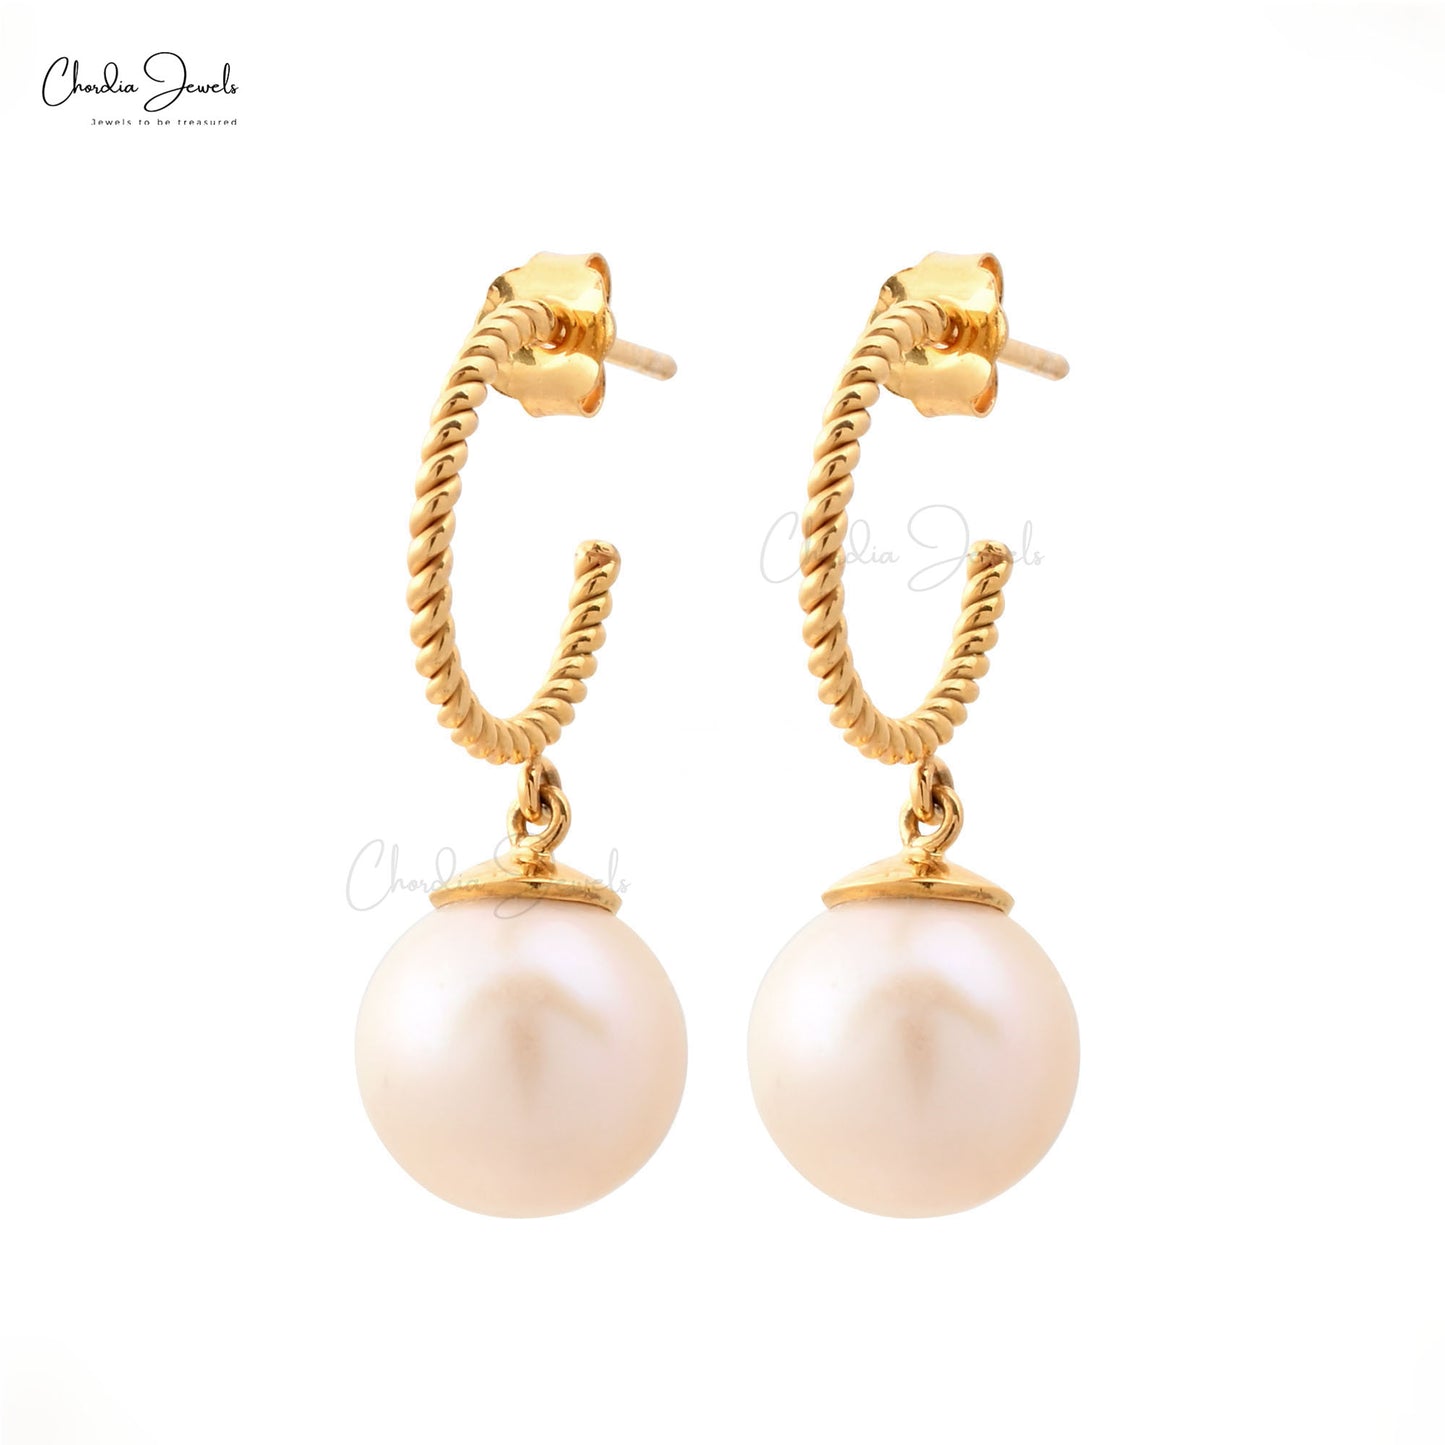 Natural 9mm Pearl Dangling Earrings 14k Yellow Gold Spiral Hoops Earring For Wedding Gift